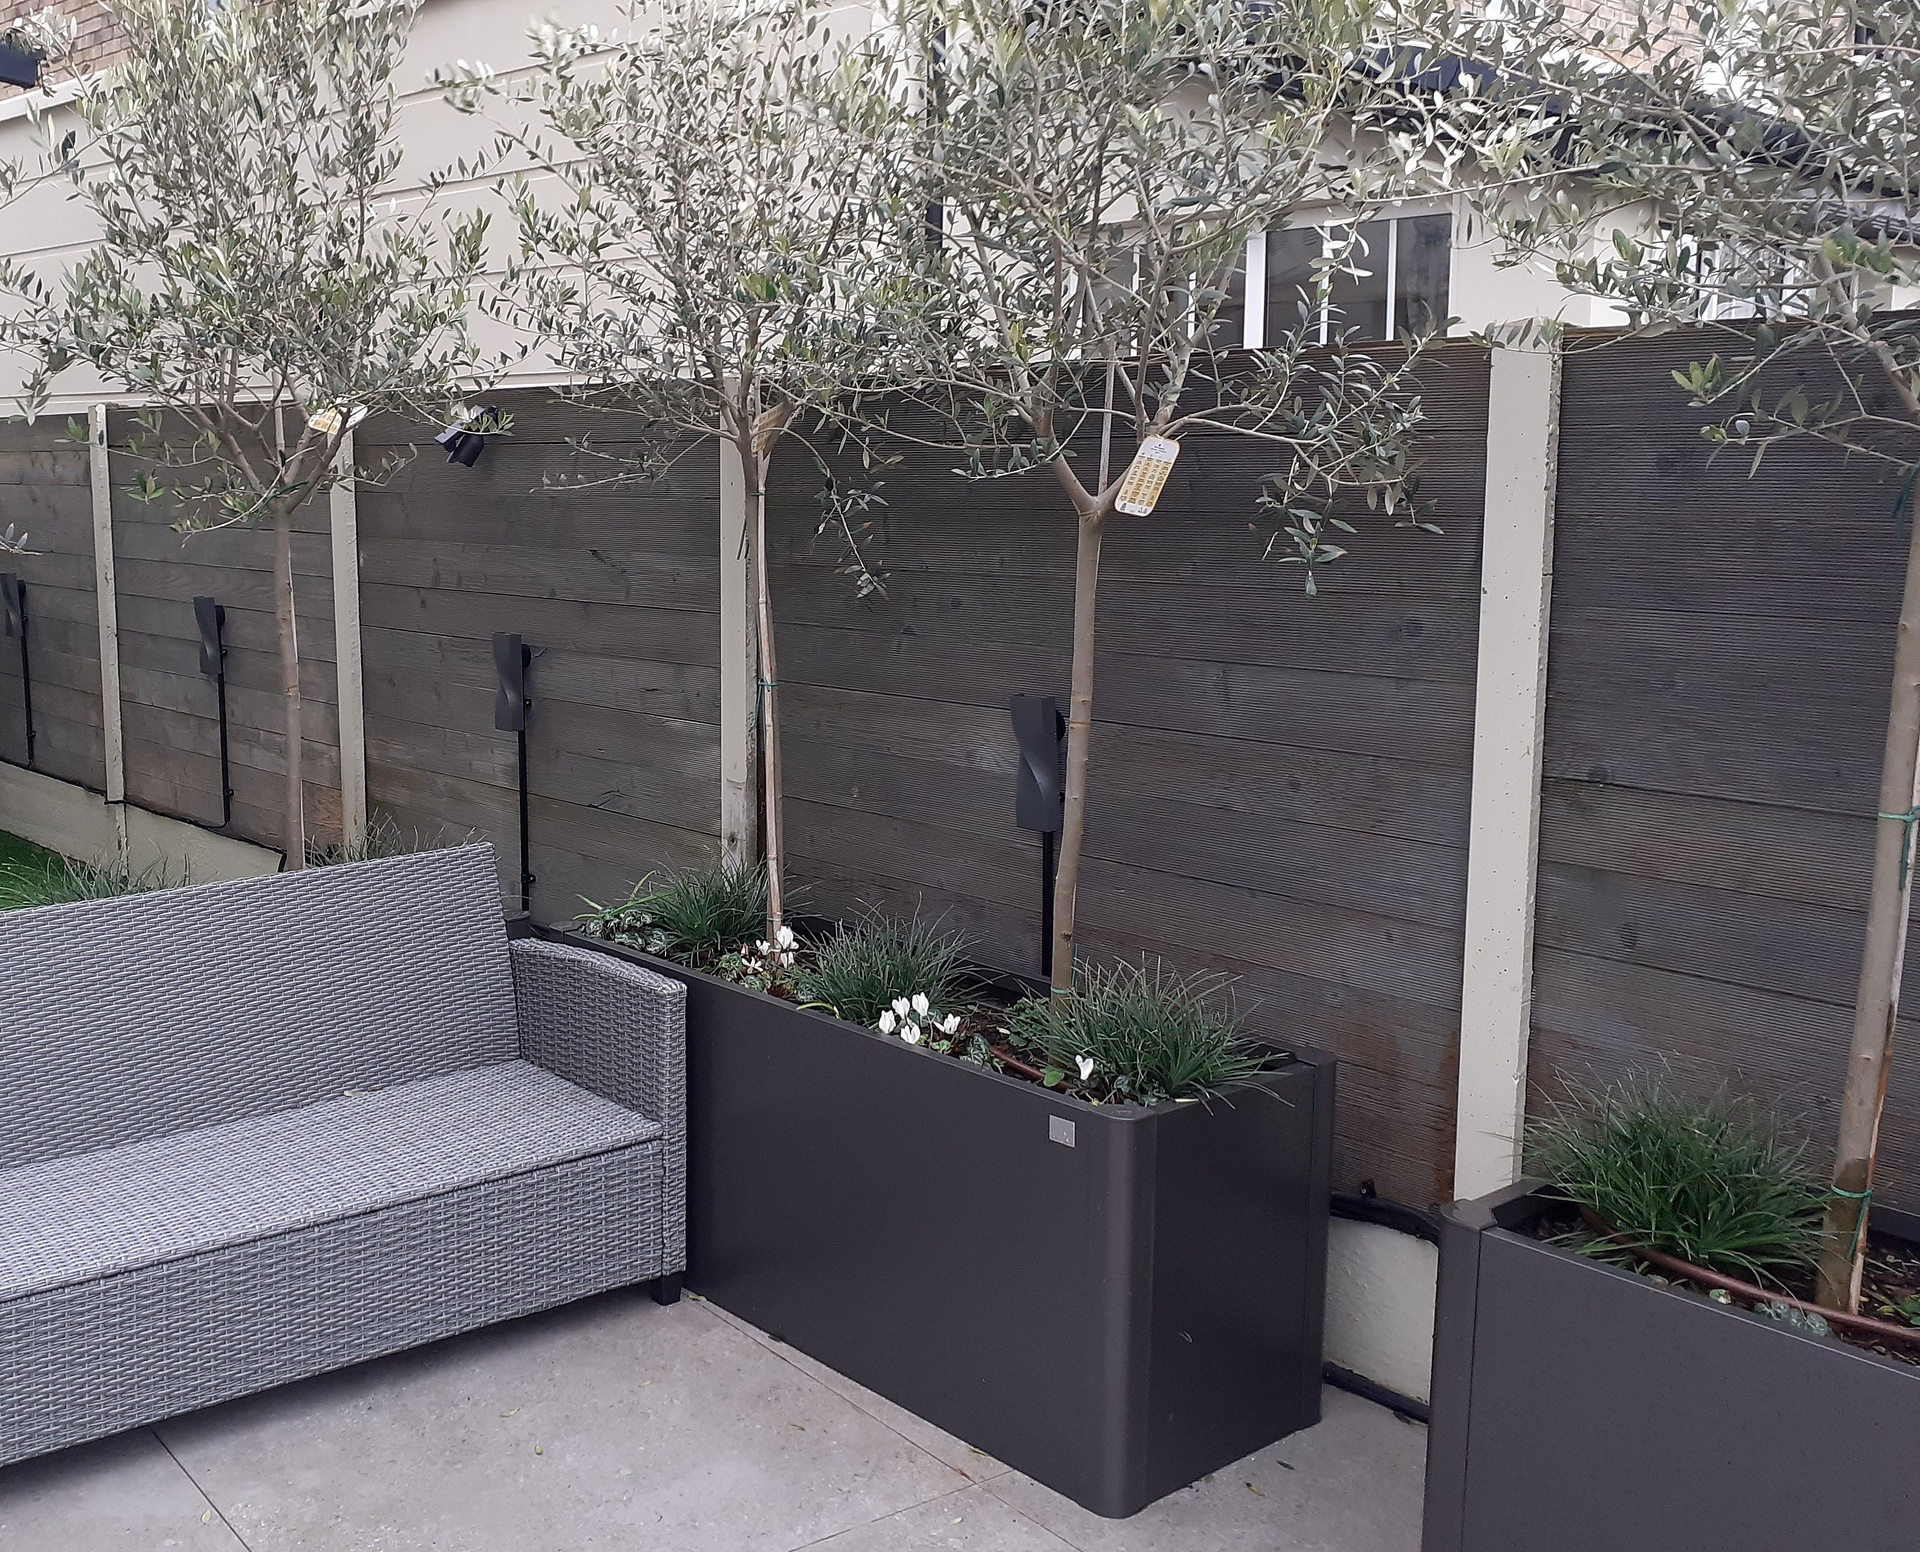 Biohort Planting Bed Belvedere - a range of steel planters offering exceptional durability, 20 year no rust warranty, and achieving thriving plant displays effortlessly.